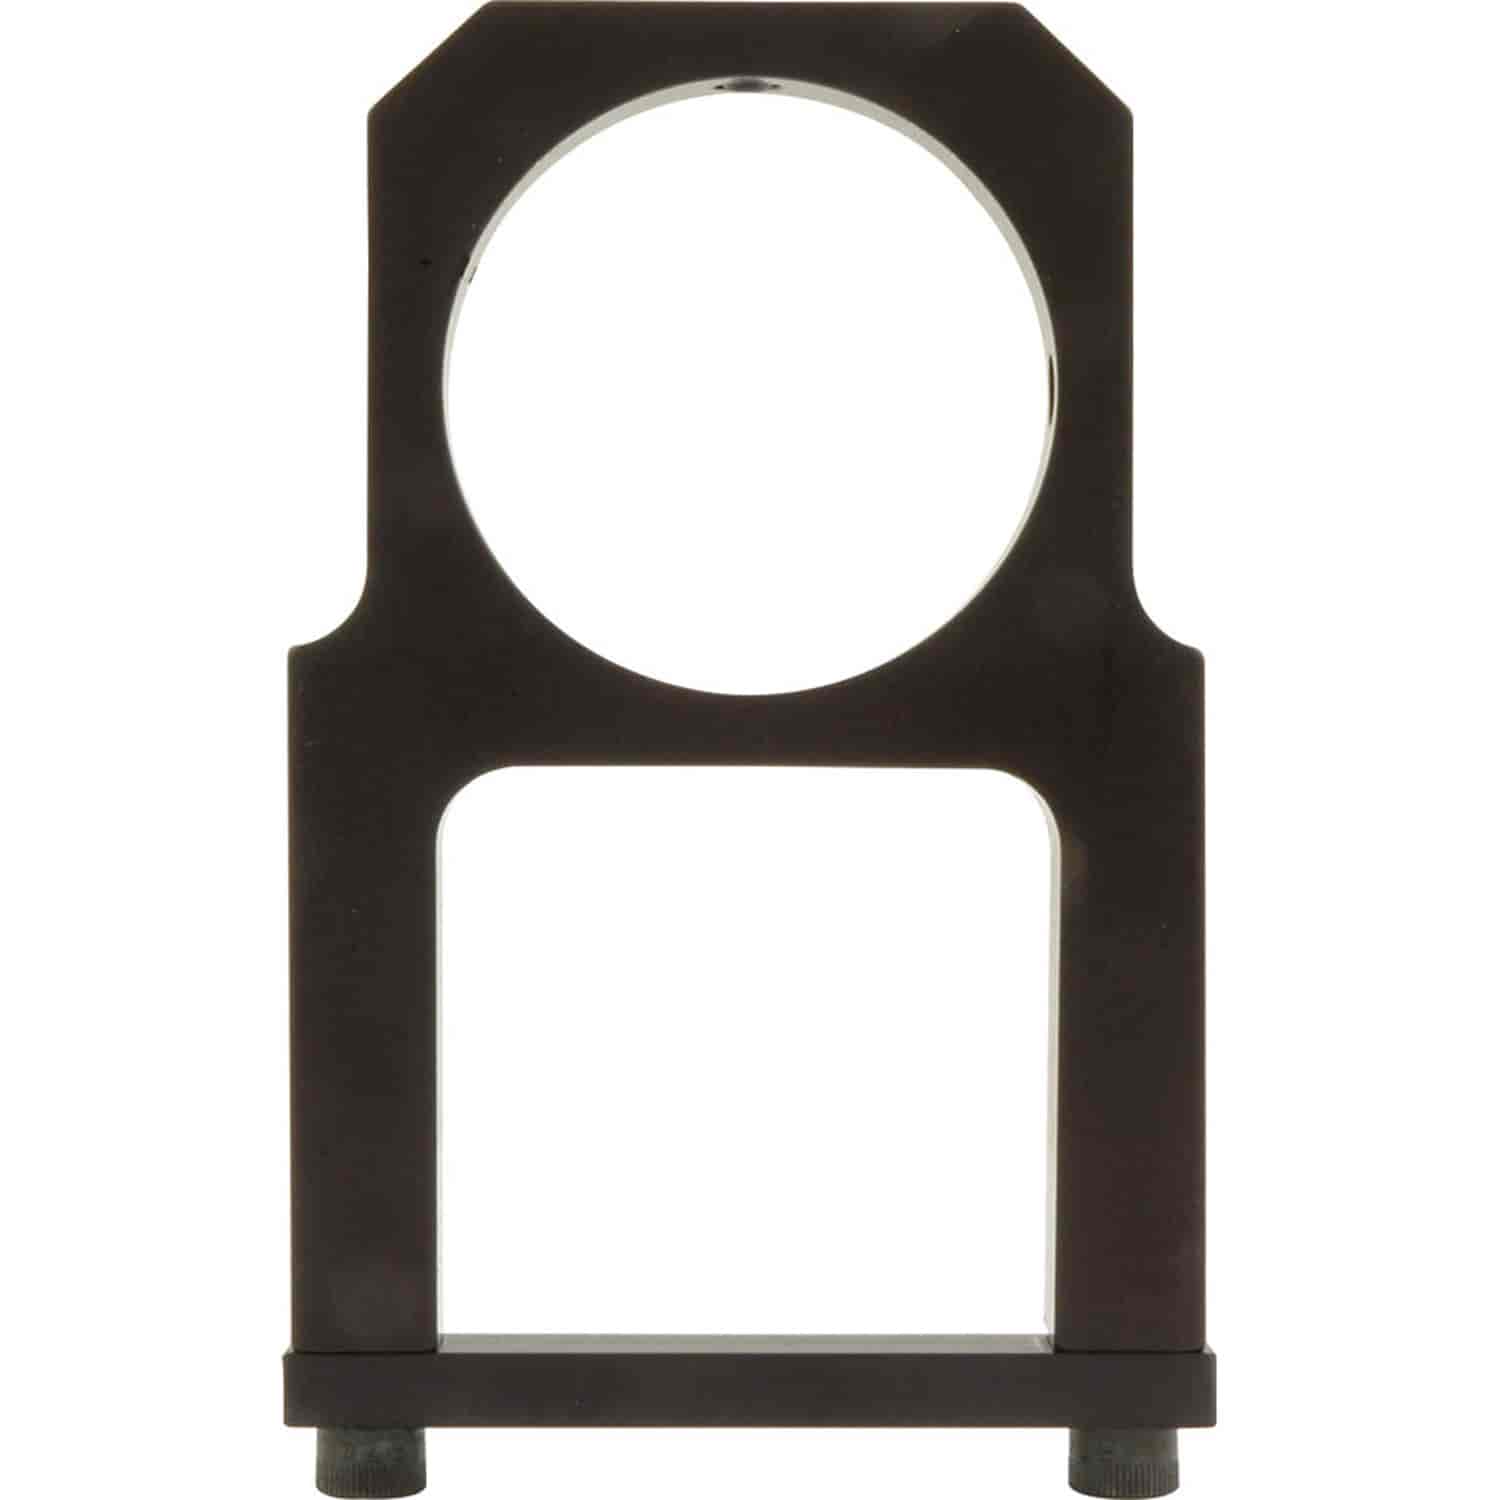 Inline Fuel Filter Bracket For 2" x 2" Square Tubing